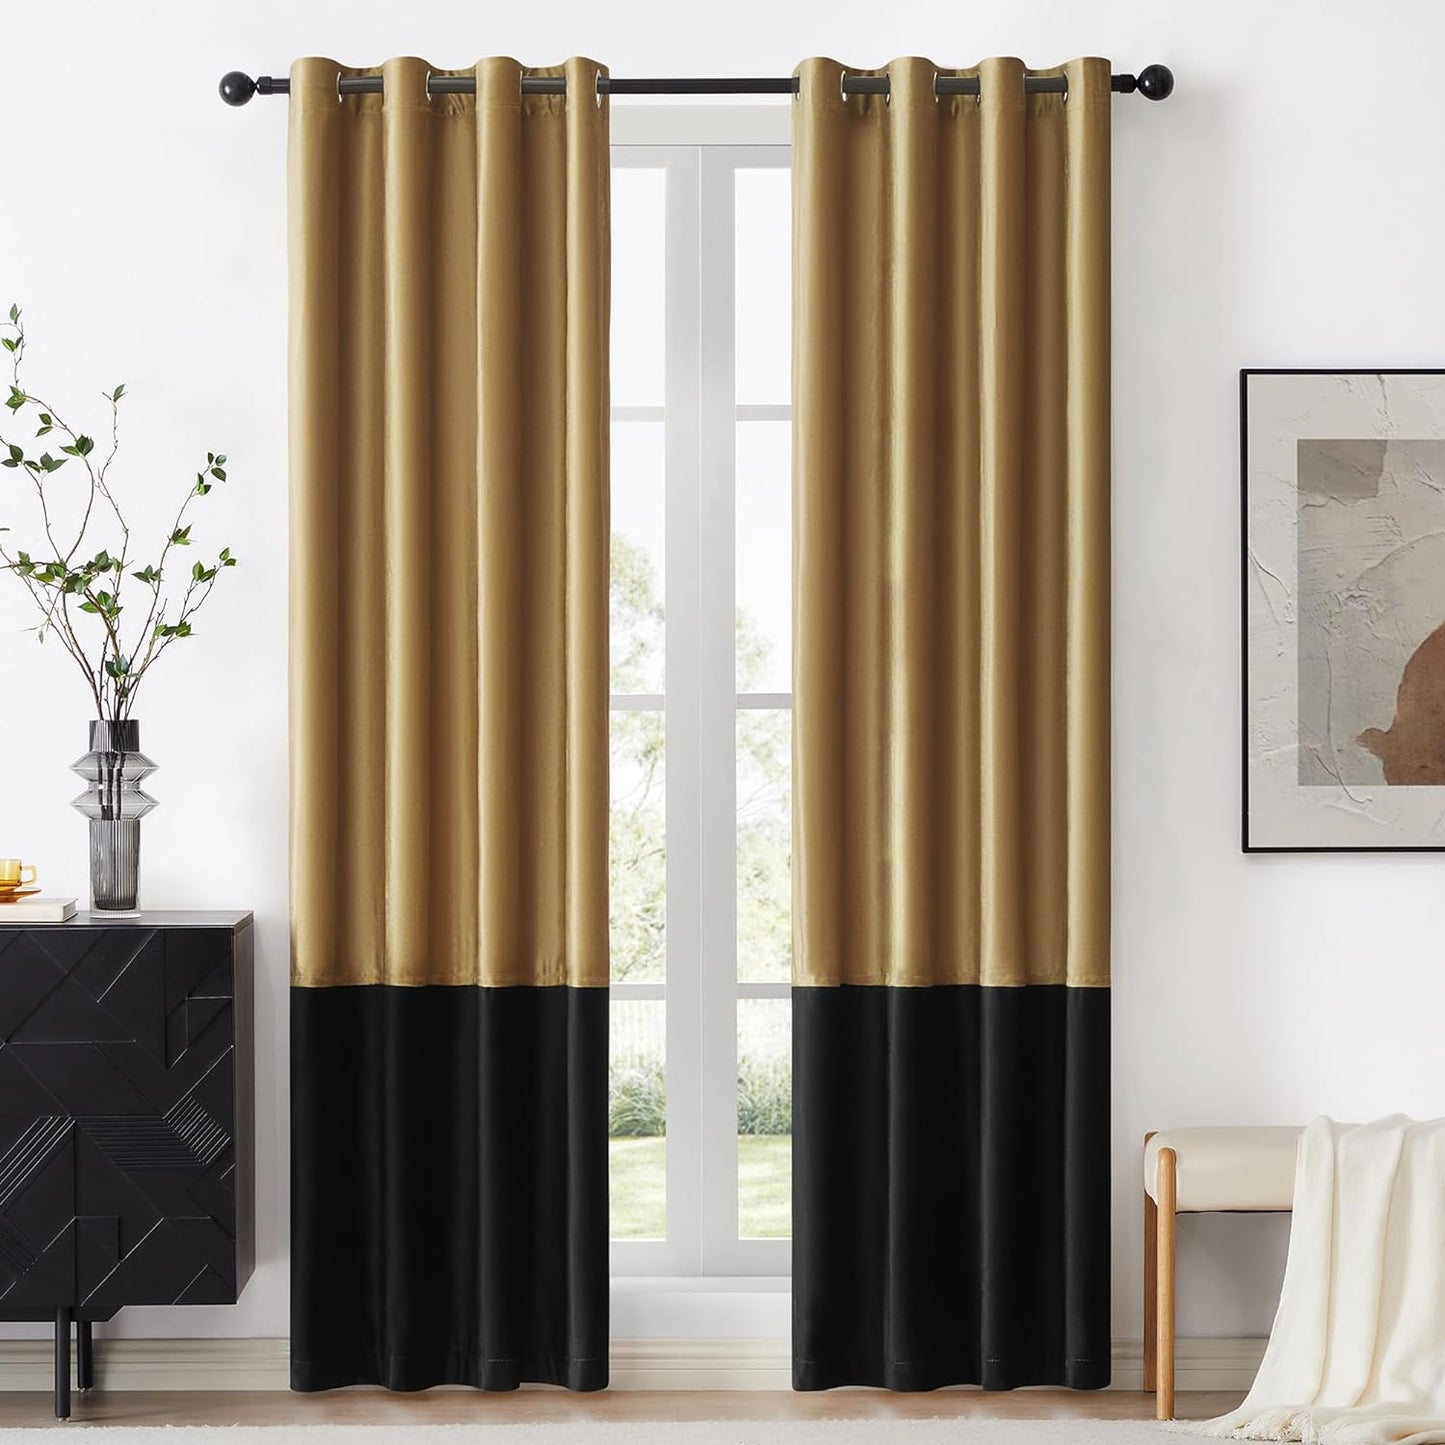 BULBUL Color Block Window Curtains Panels 84 Inches Long Cream Ivory Gold Velvet Farmhouse Drapes for Bedroom Living Room Darkening Treatment with Grommet Set of 2  BULBUL Gold  Black 52"W X 96"L 